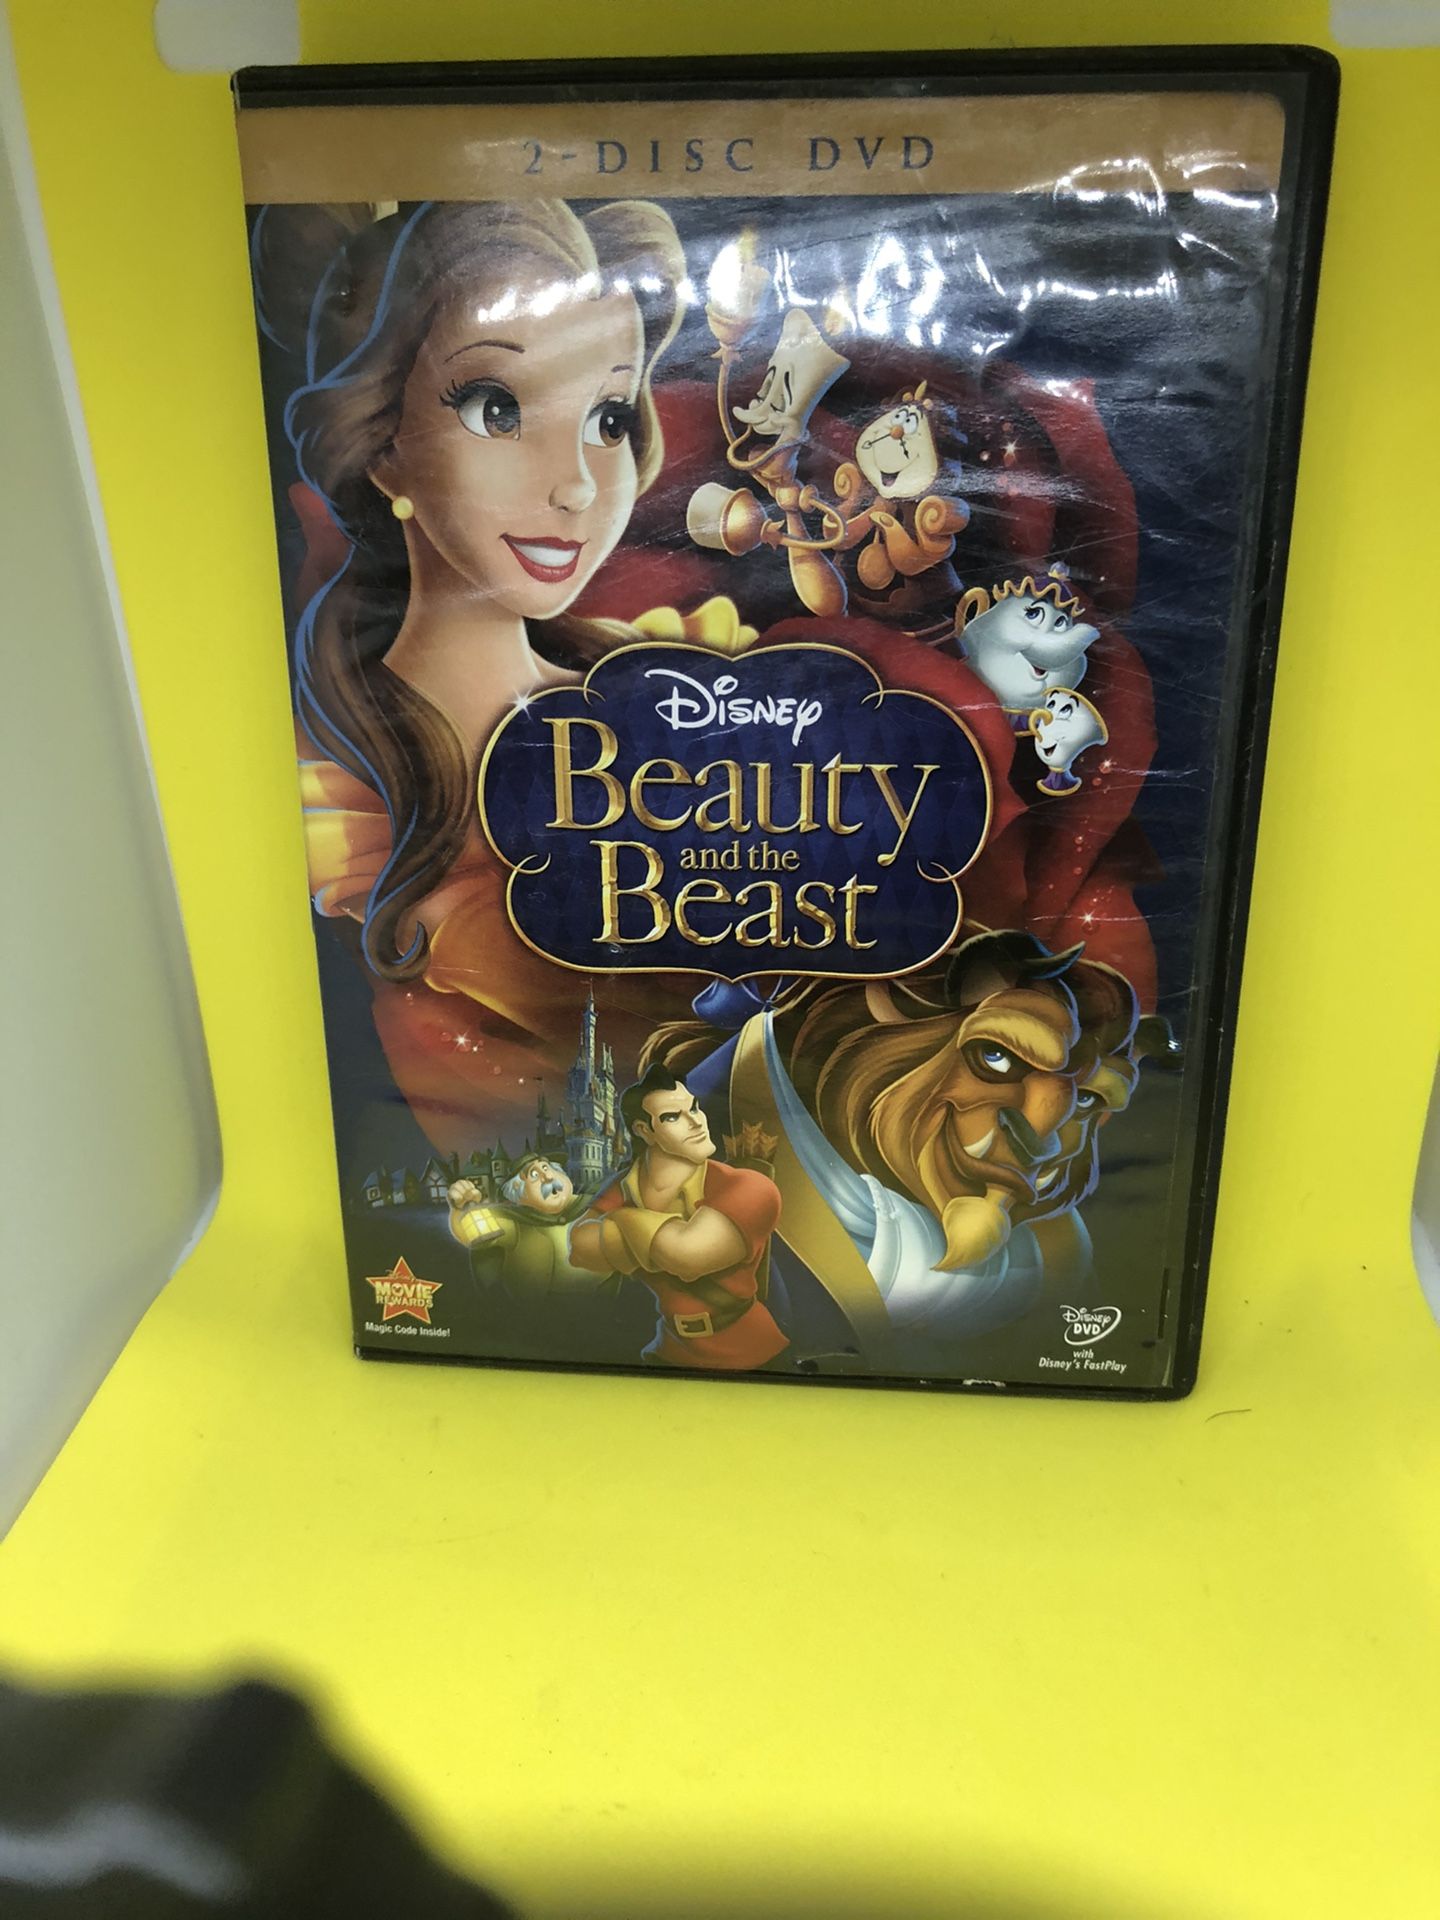 Beauty and the Beast (DVD, Disney, 2010, 2-Disc Set) - Free Shipping!